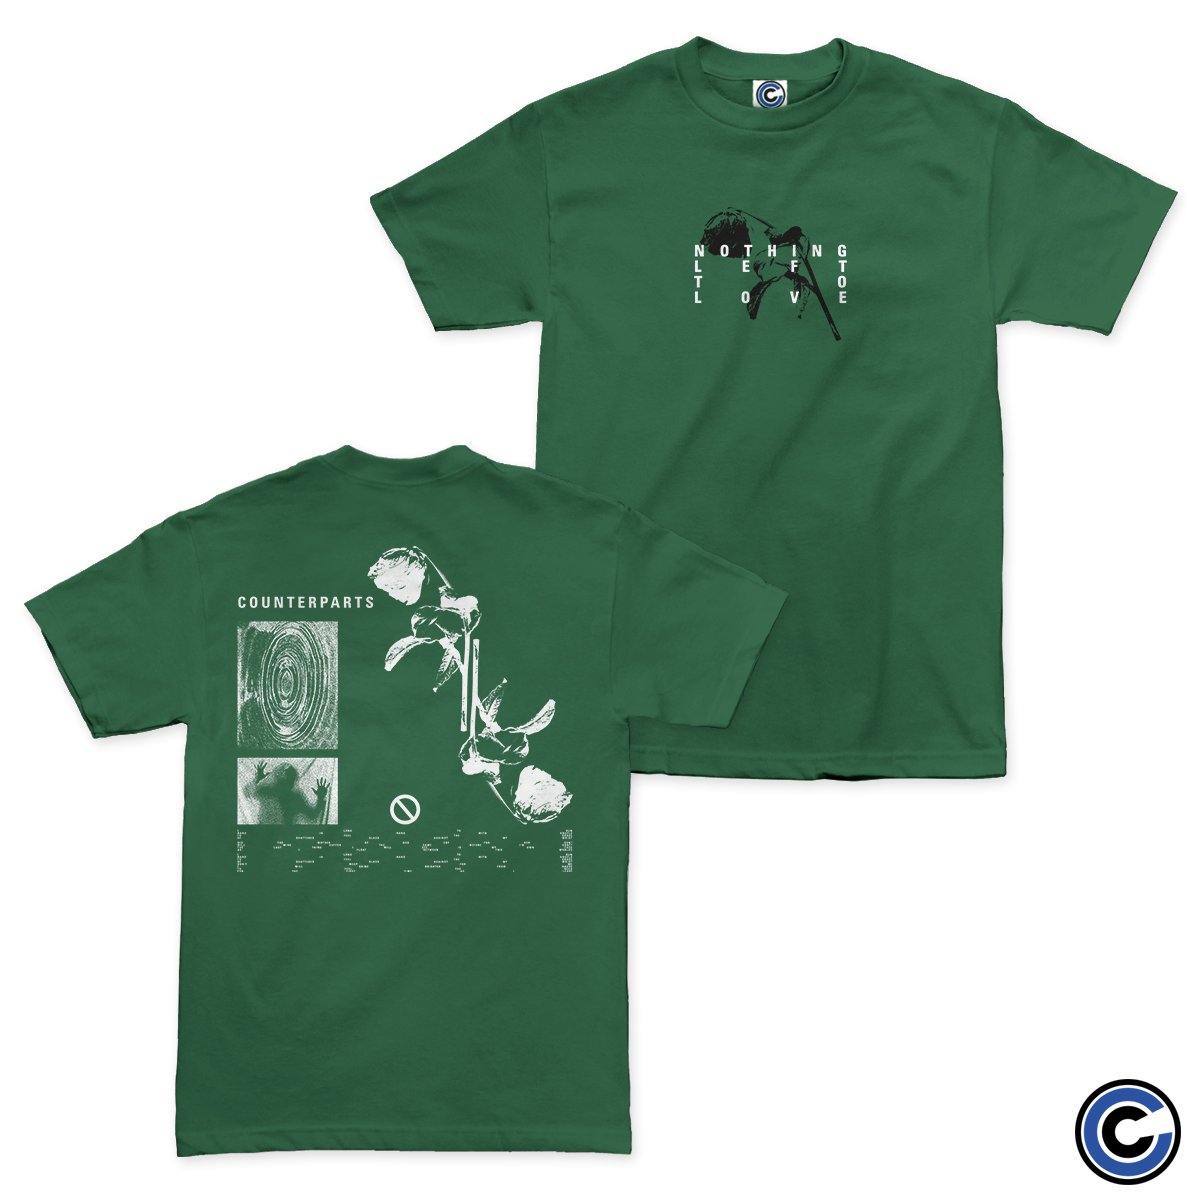 Buy – Counterparts "Nothing Left" Shirt – Band & Music Merch – Cold Cuts Merch